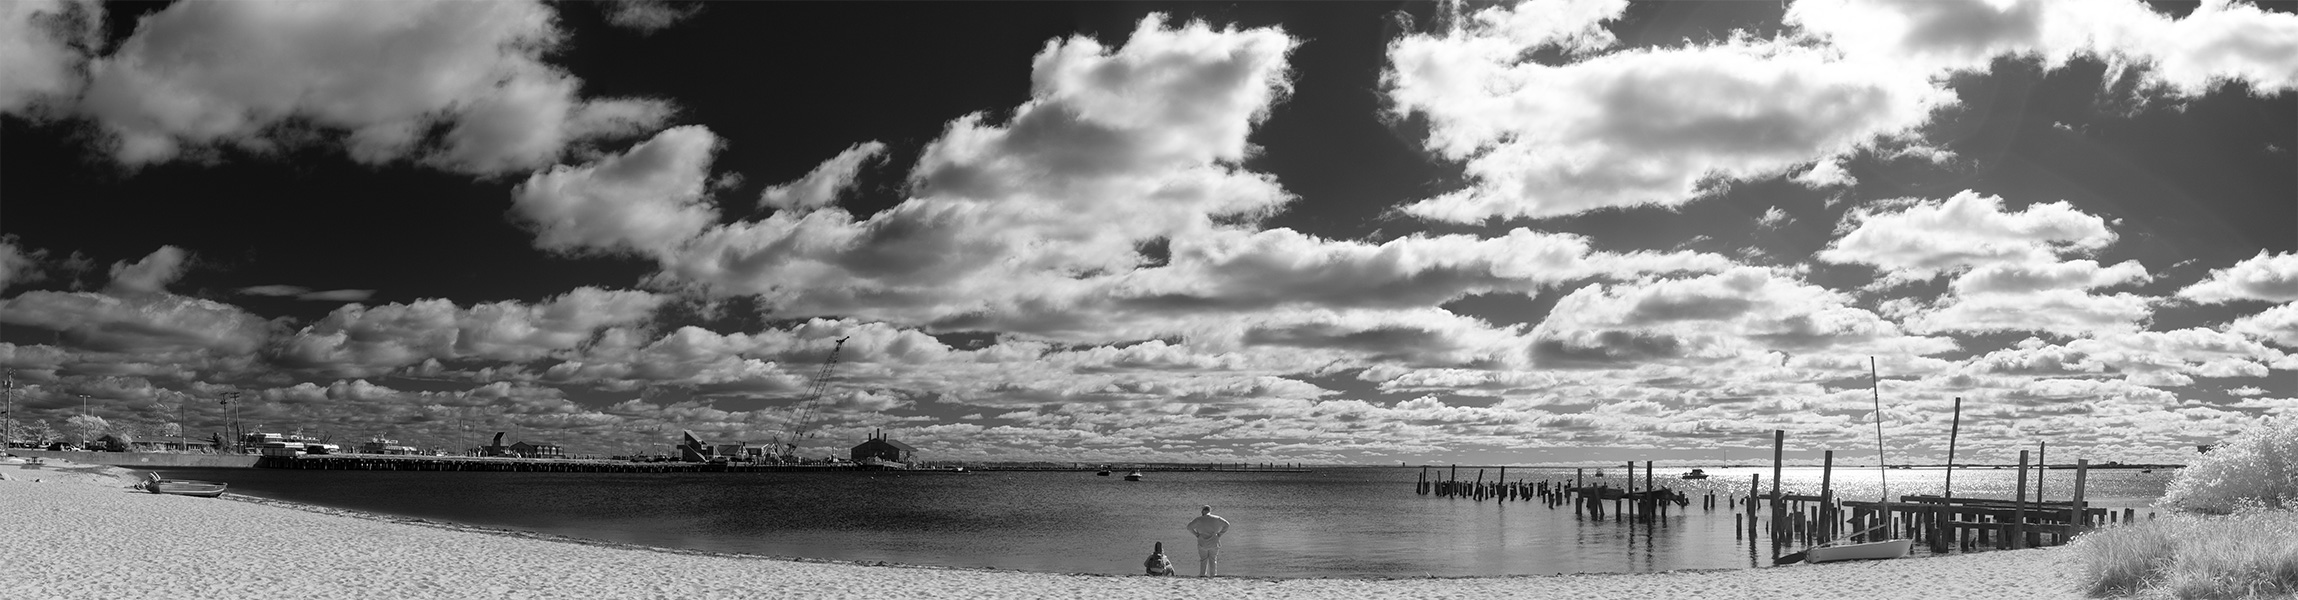 Infrared Panoramic Photograph of Beach and Docks.